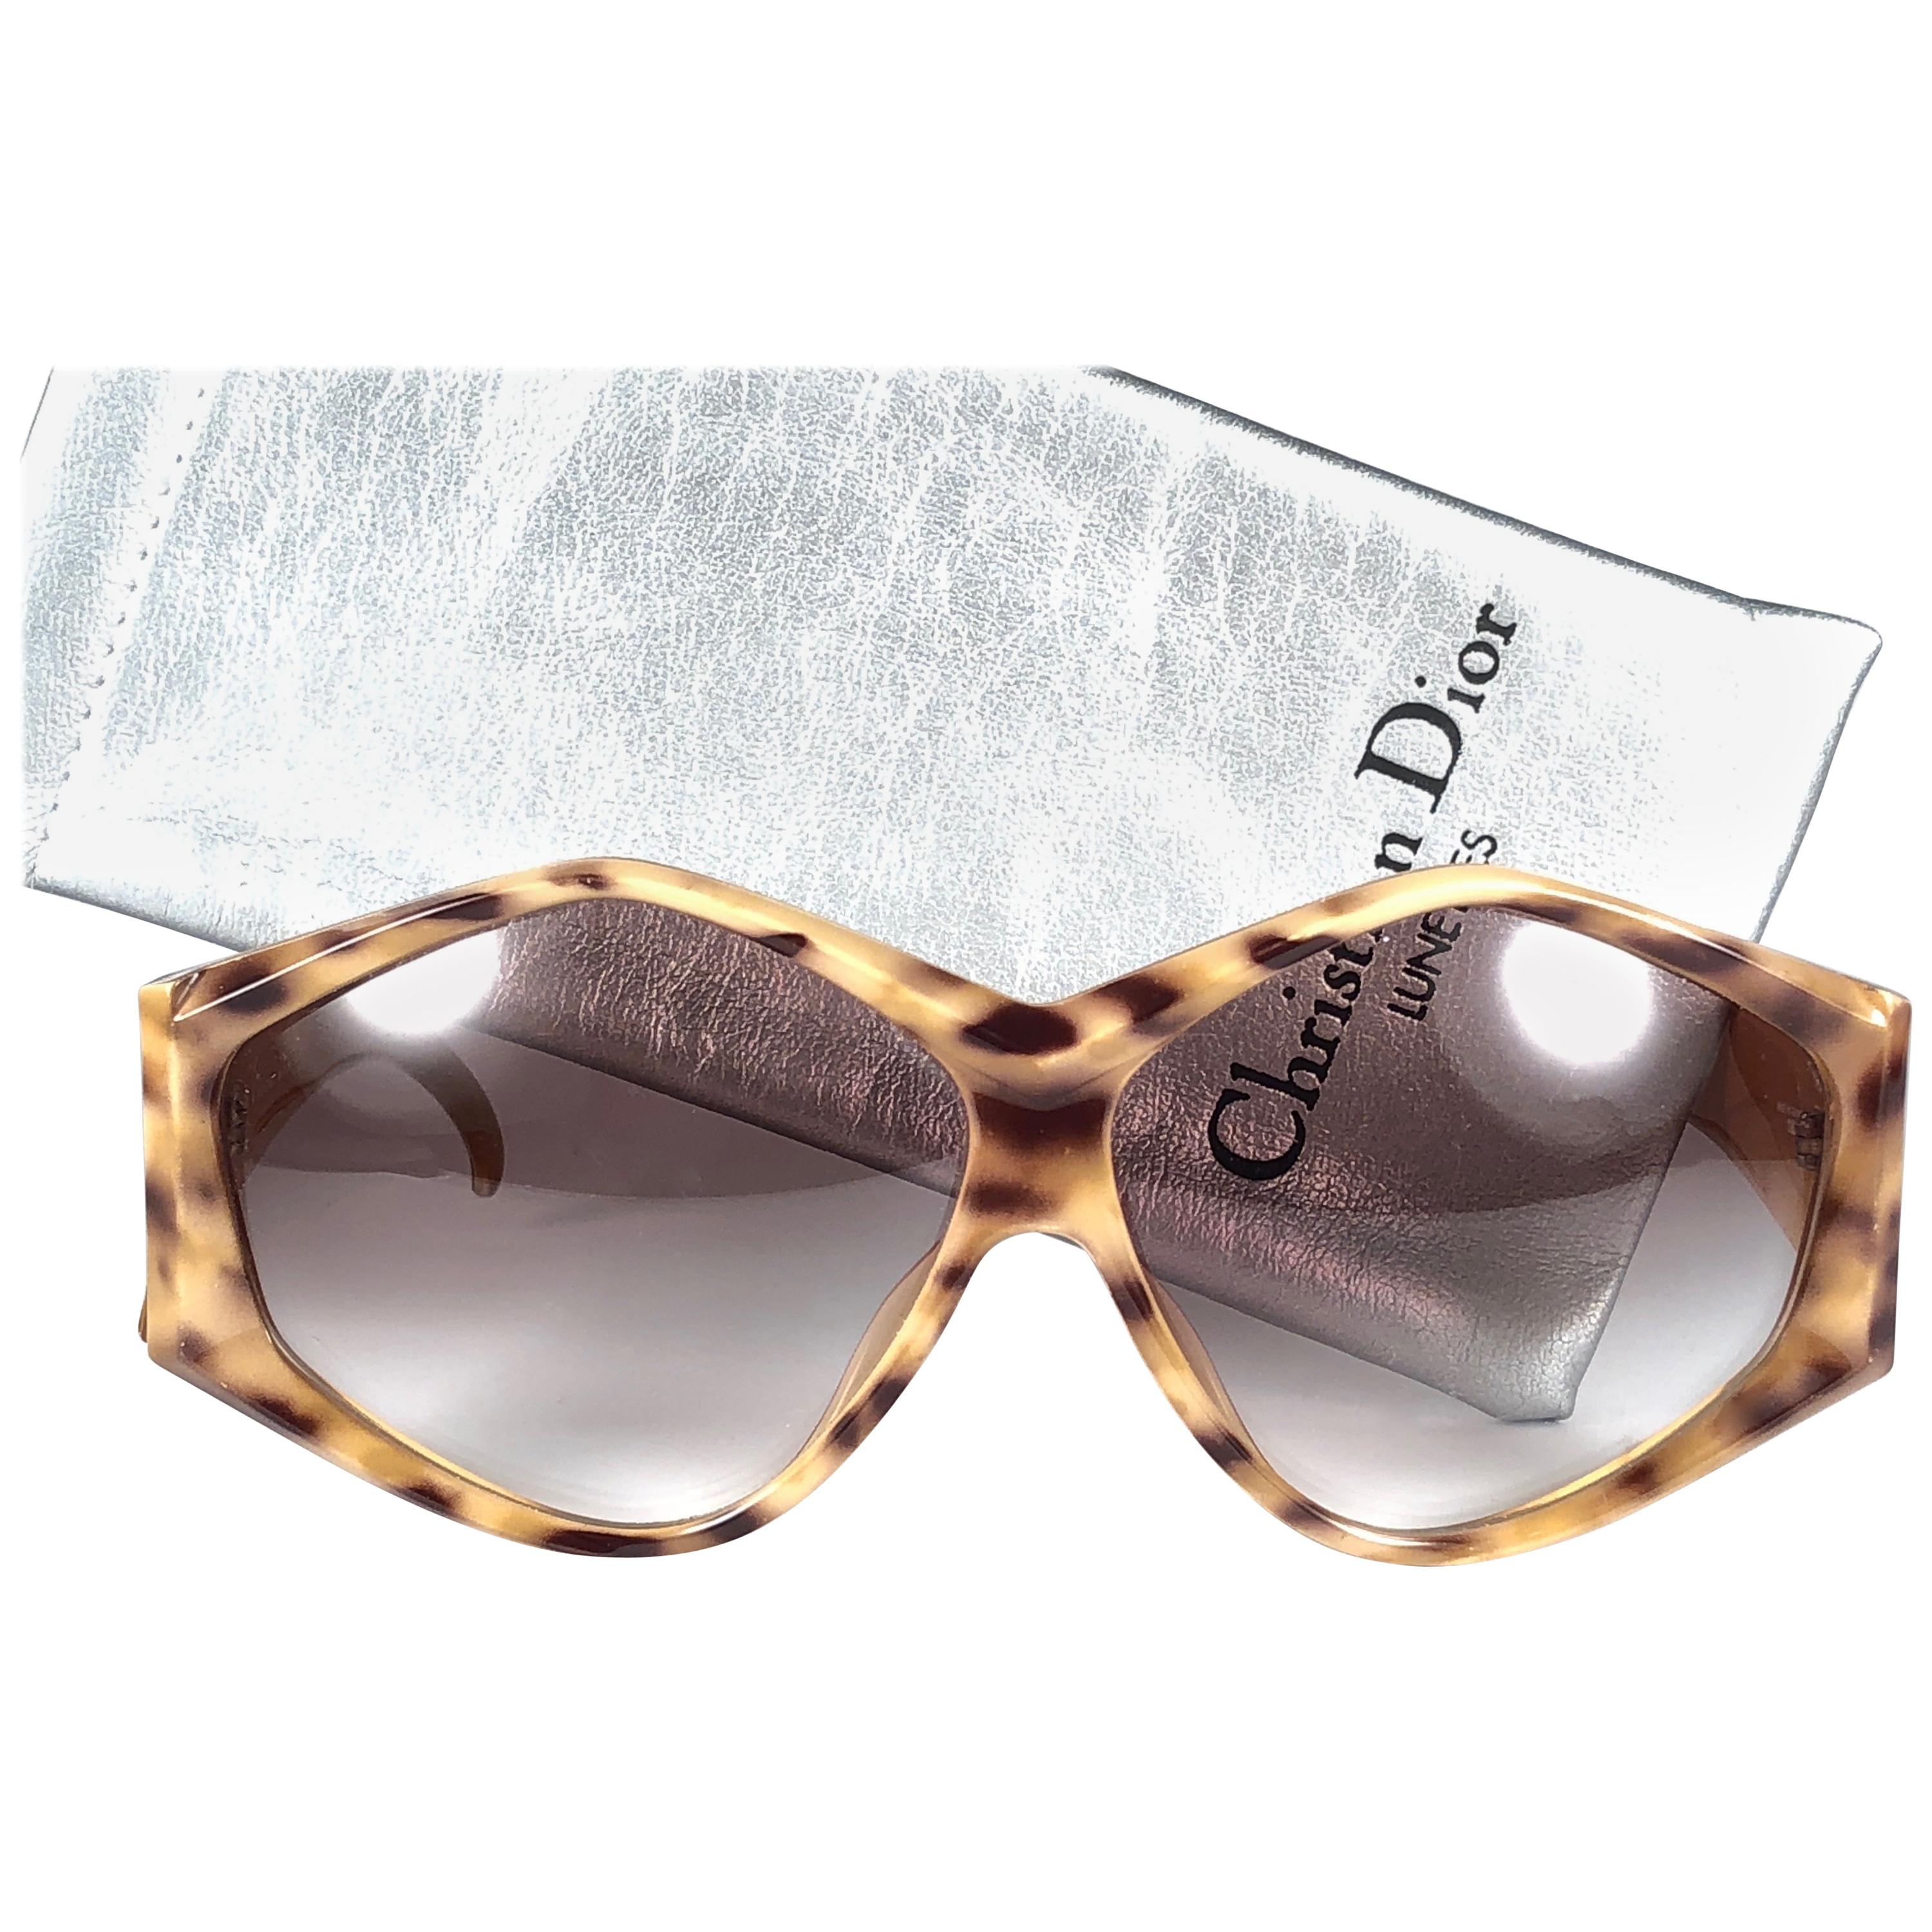 New Vintage Christian Dior 2230 10 Leopard Origami Optyl Sunglasses Germany